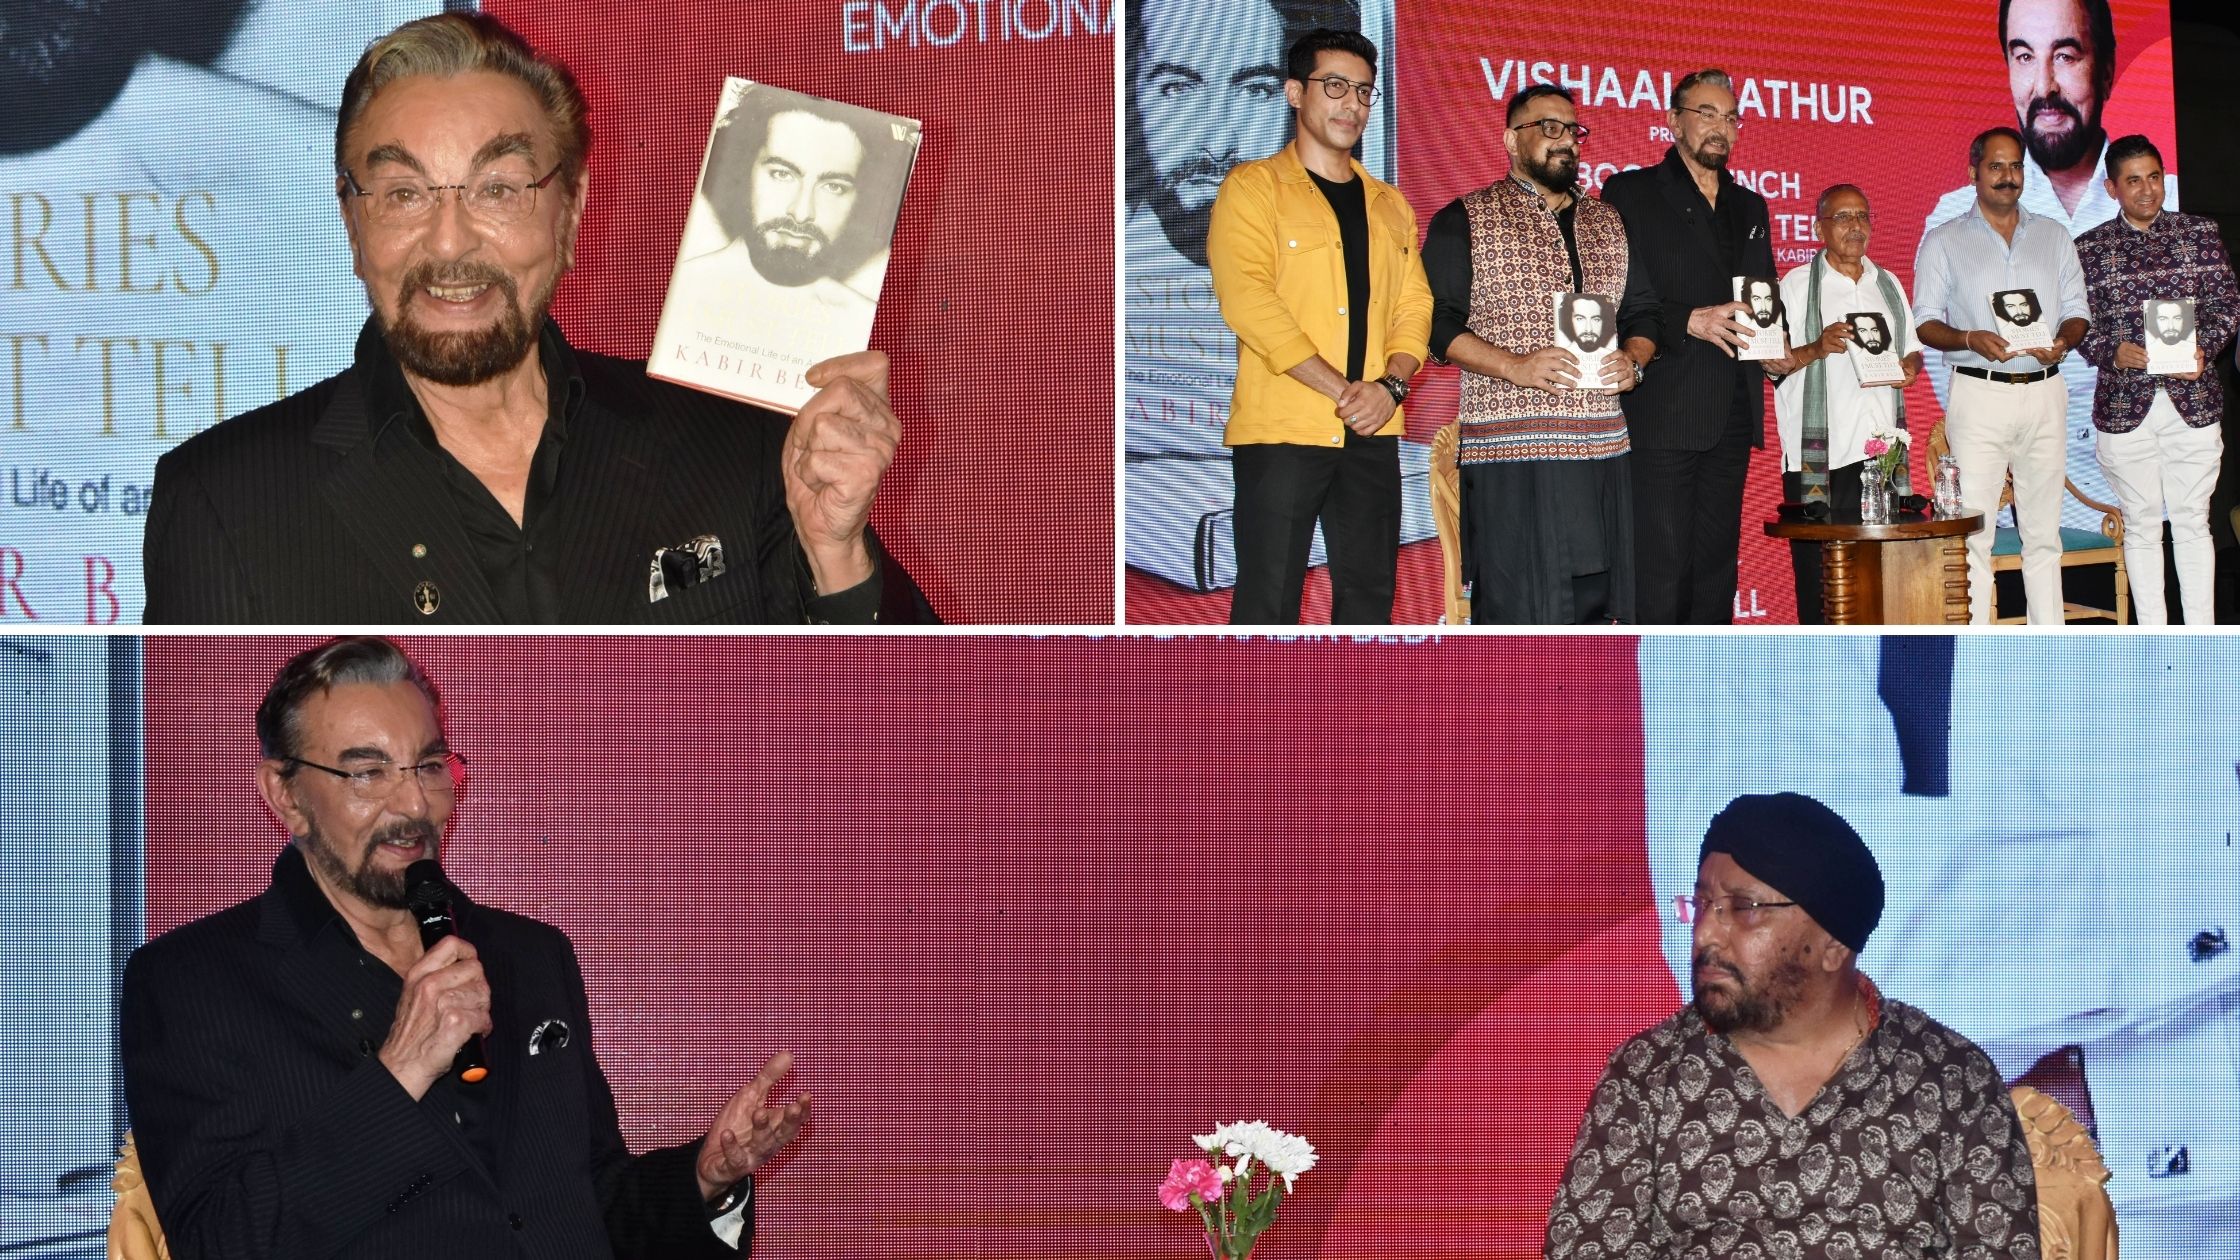 Actor Kabir Bedi was in Jaipur recently for the launch of his autobiography ‘Stories I Must Tell: The Emotional Life of an Actor’. The book launch was preceded by an interesting conversation with the author at Fairmont Jaip